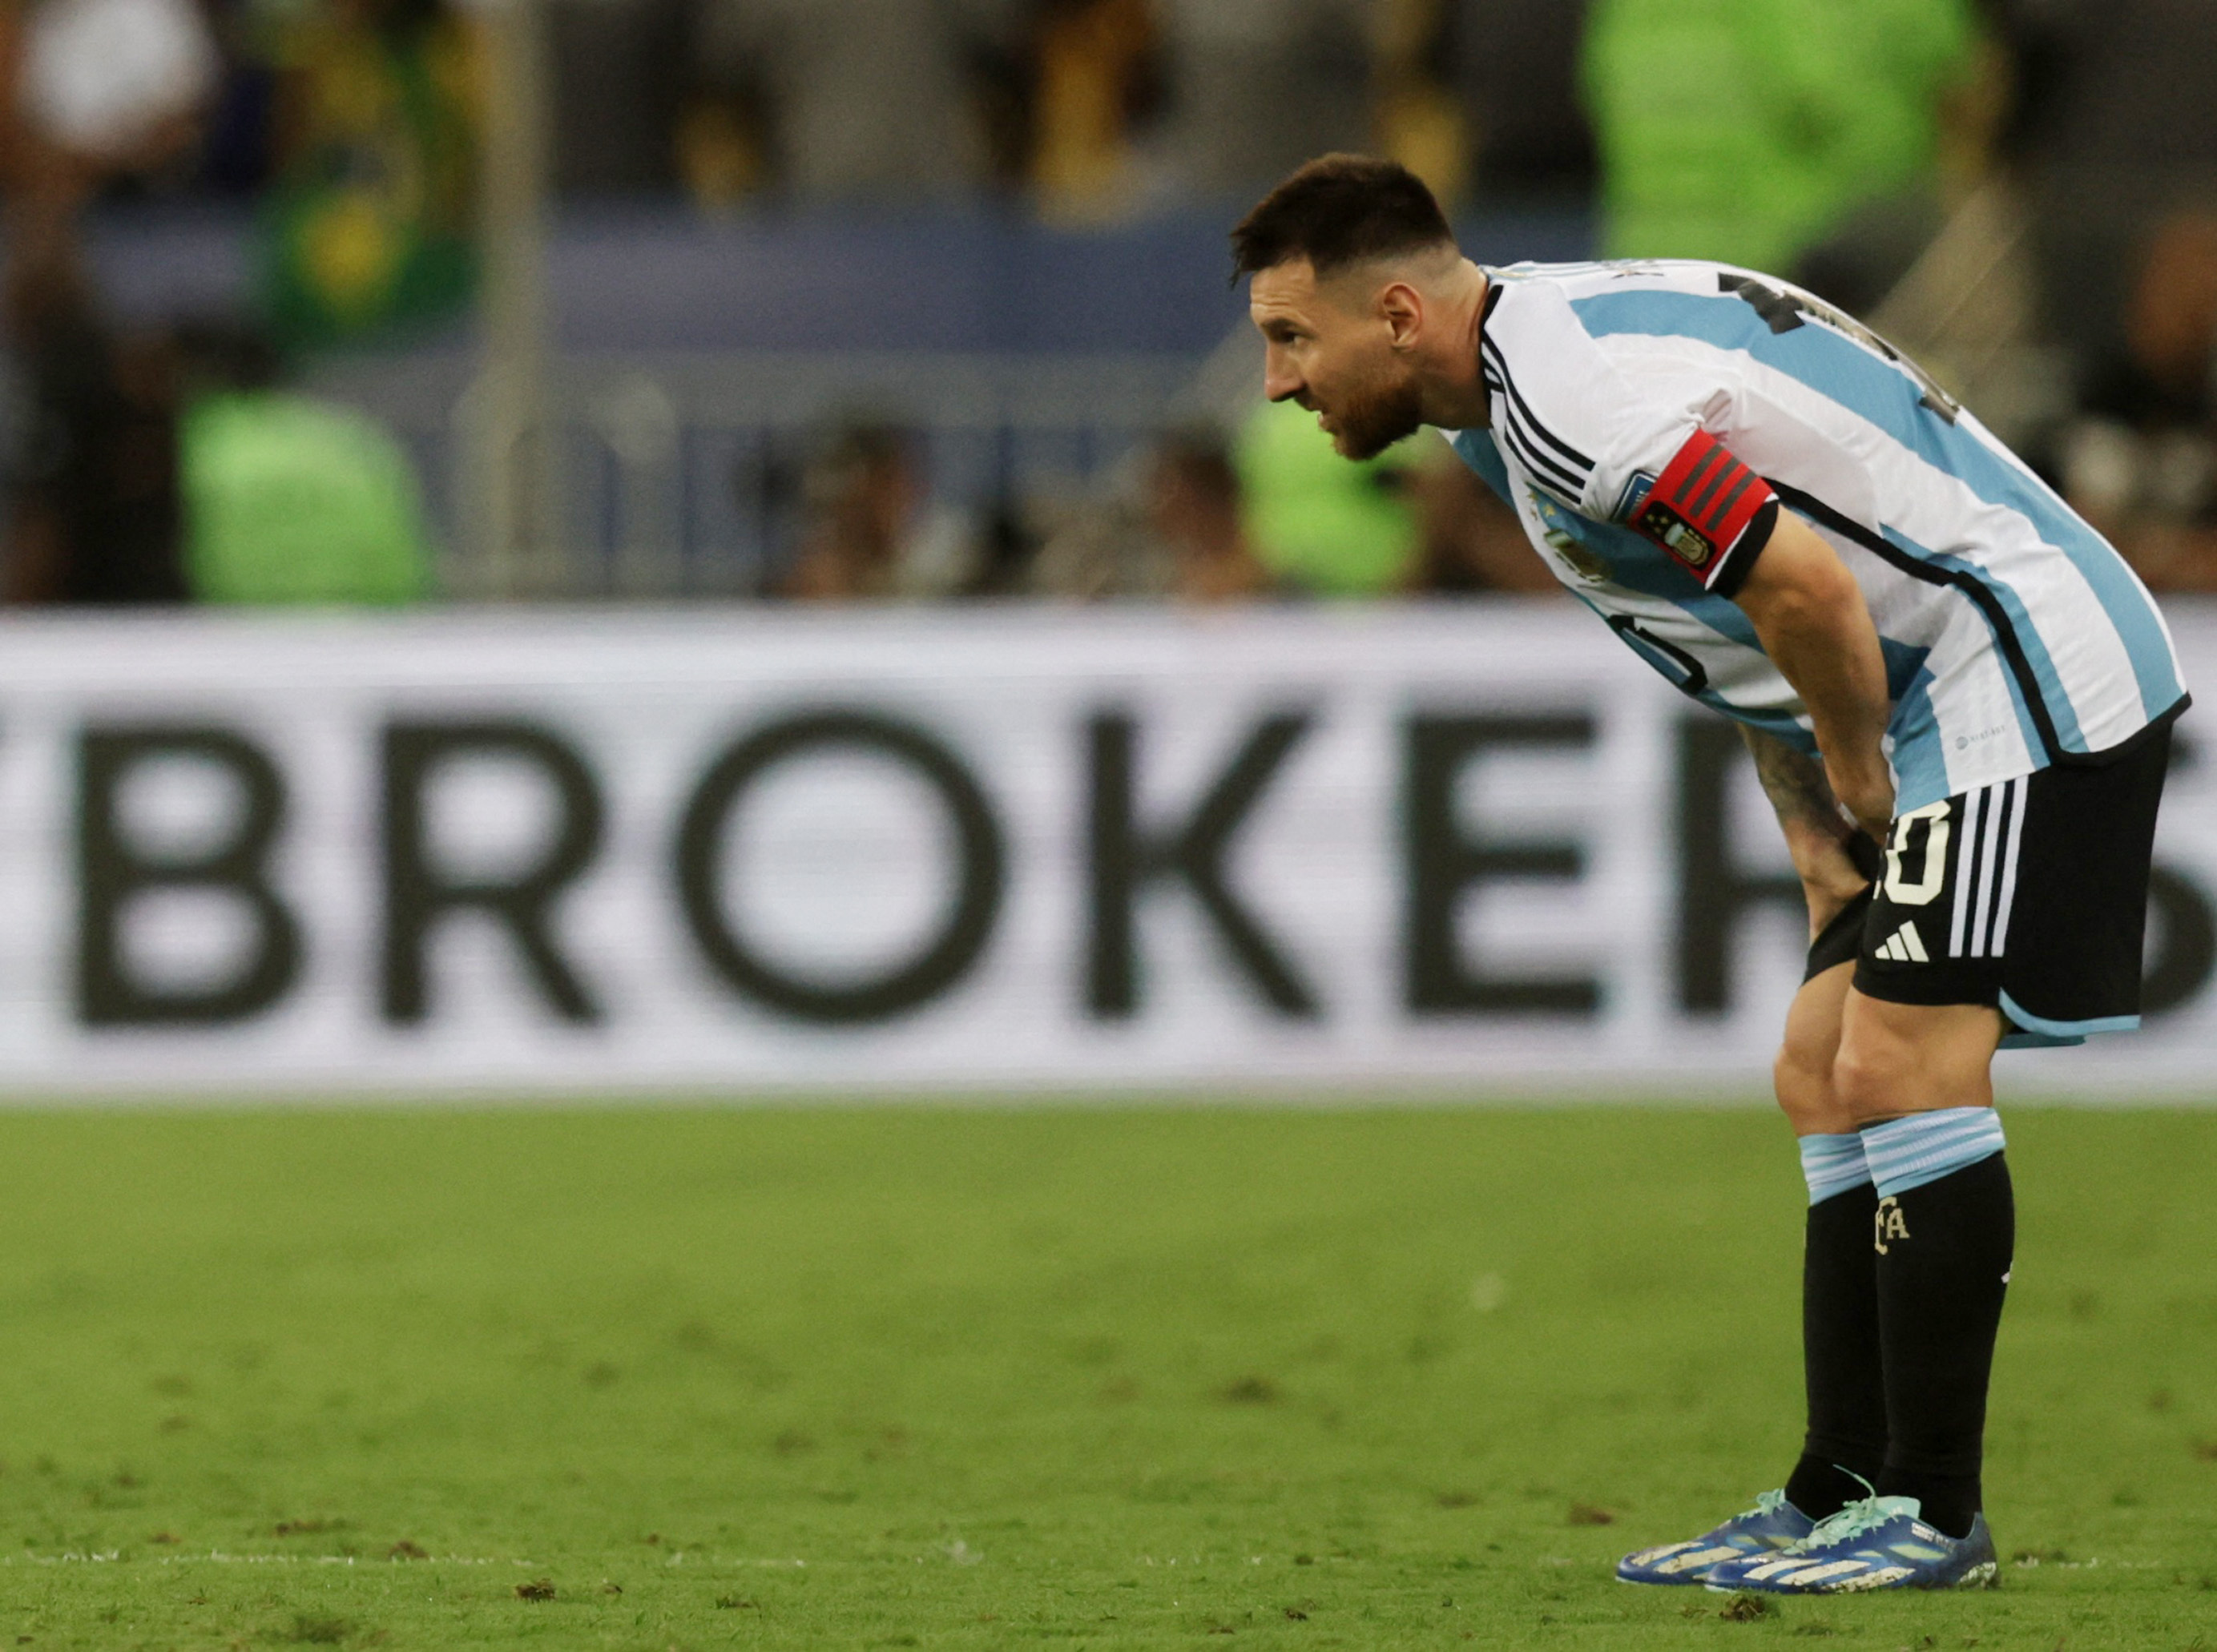 Argentina vs. Brazil highlights: Messi exits last match of 2023 early